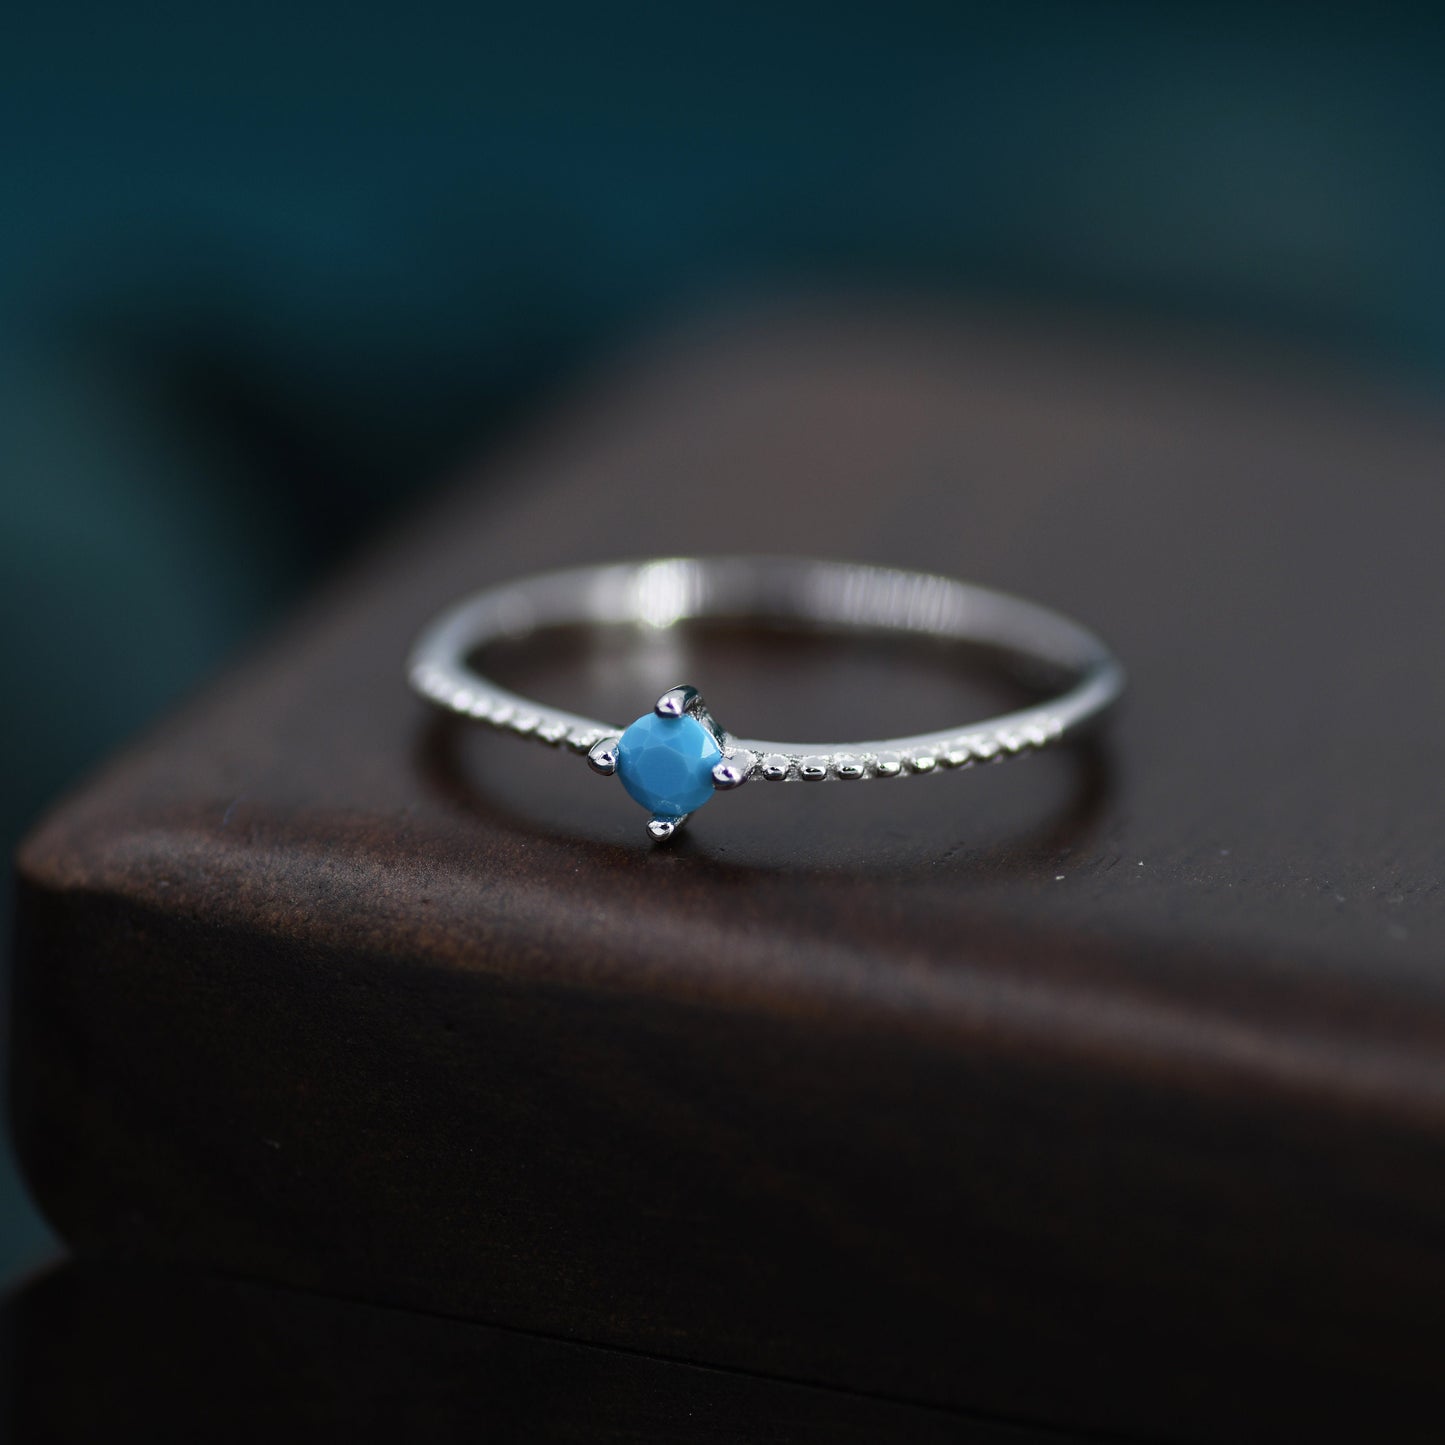 December Birthstone Turquoise Ring in Sterling Silver,  Delicate Stacking Ring, Skinny Band, Size US 6 - 8,  December Birthstone